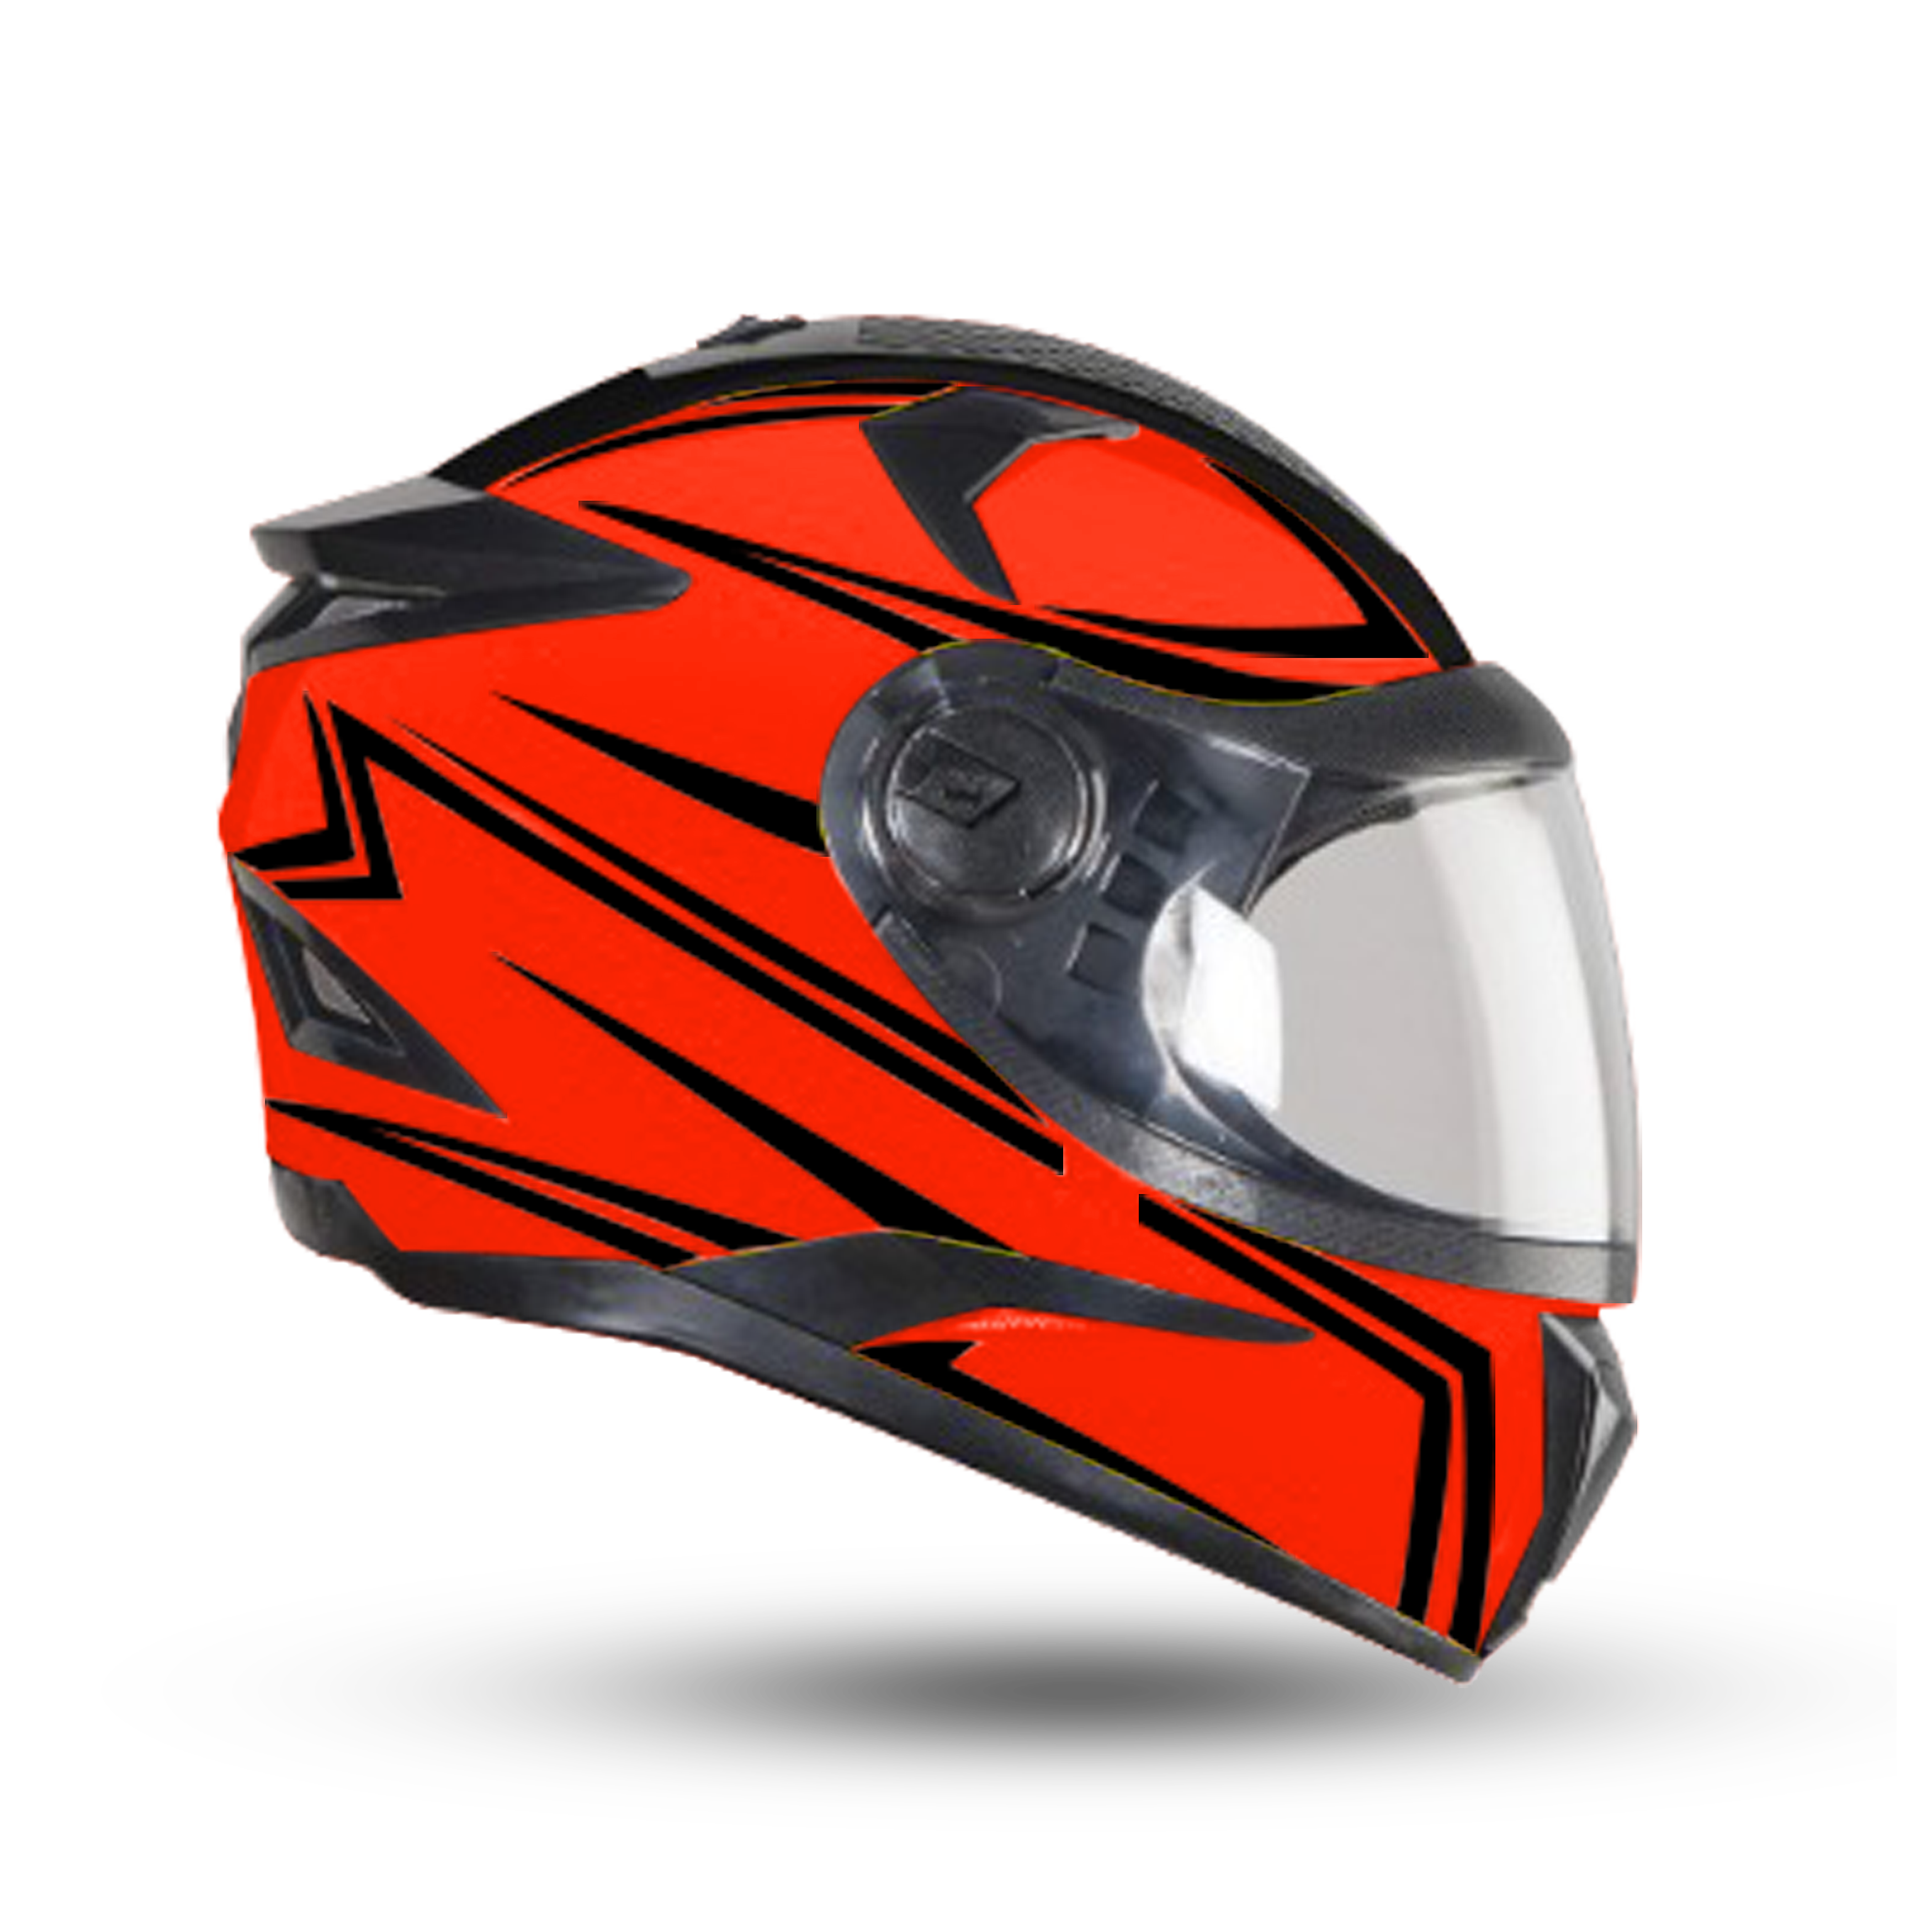 Steelbird 7Wings Robot Opt ISI Certified Full Face Helmet With Night Reflective Graphics (Glossy Fluo Red Black With Clear Visor)